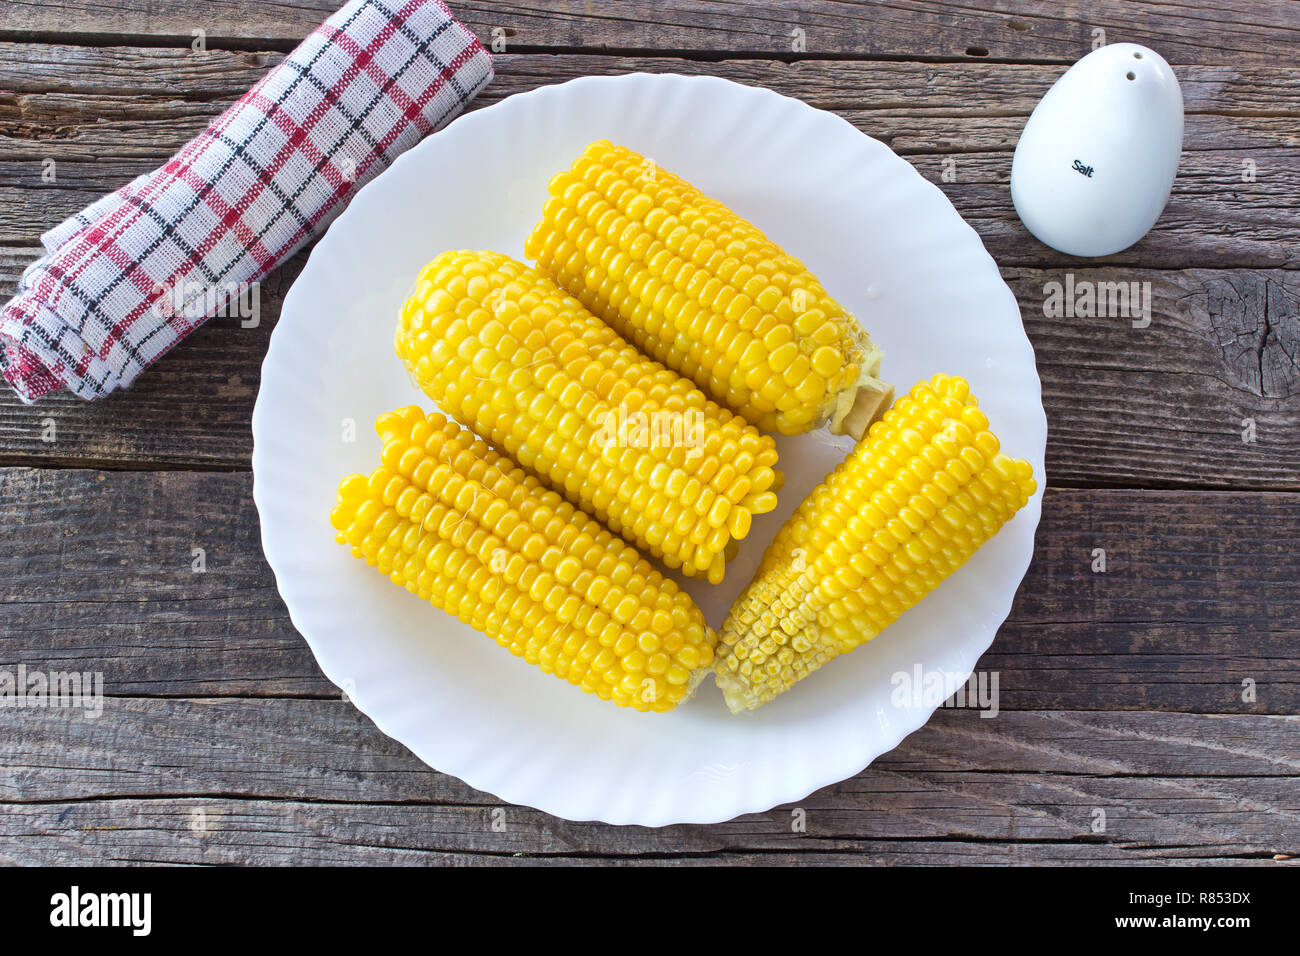 Cooked corn cobs in plate on wooden table Stock Photo